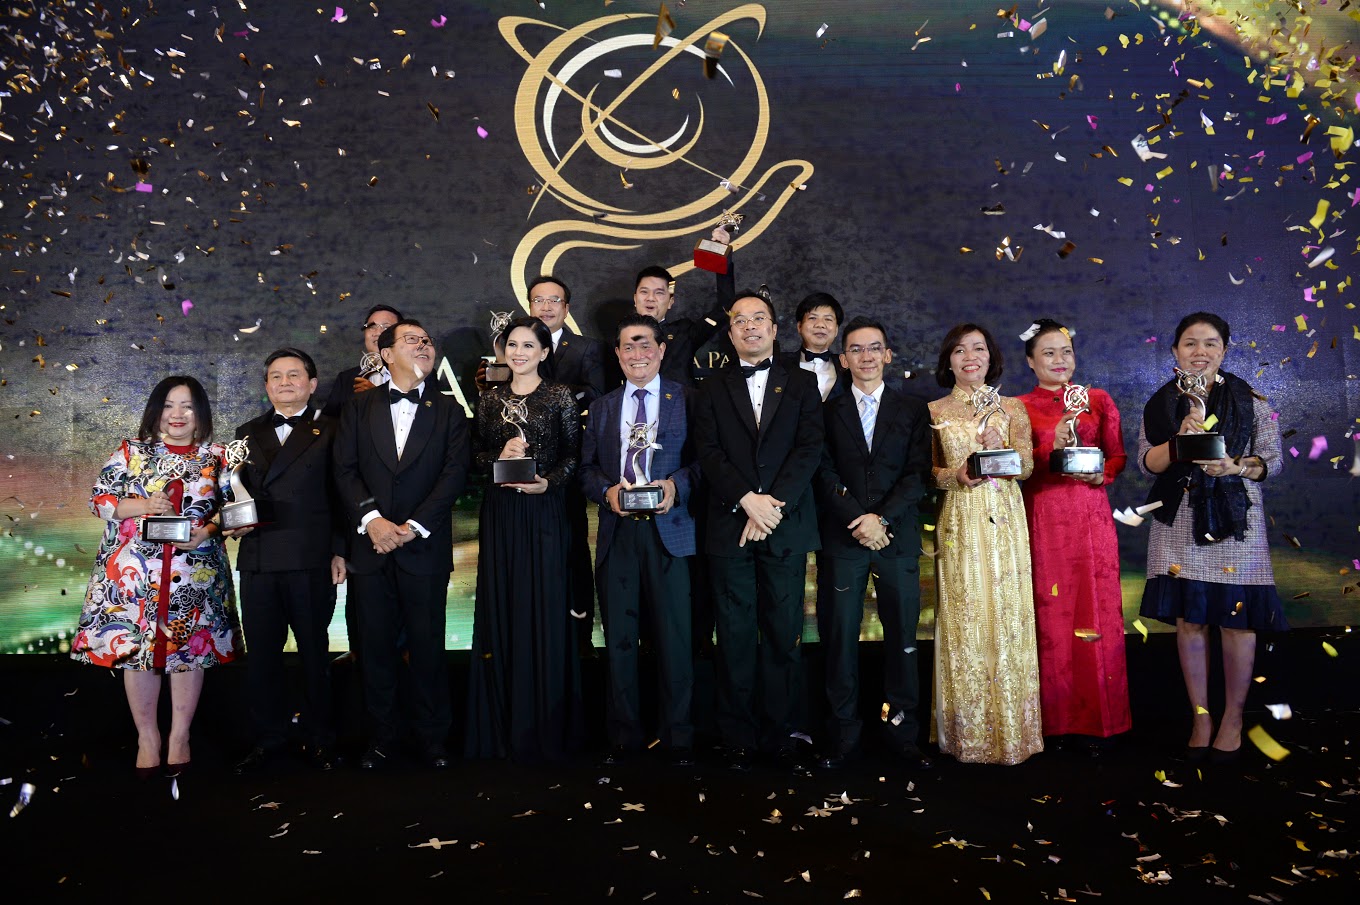 Mrs. Hoang Nguyen Thu Thao – CEO of Nguyen Hoang Group (NHG) along with 14 outstanding business leaders of Vietnam received APEA award 2017